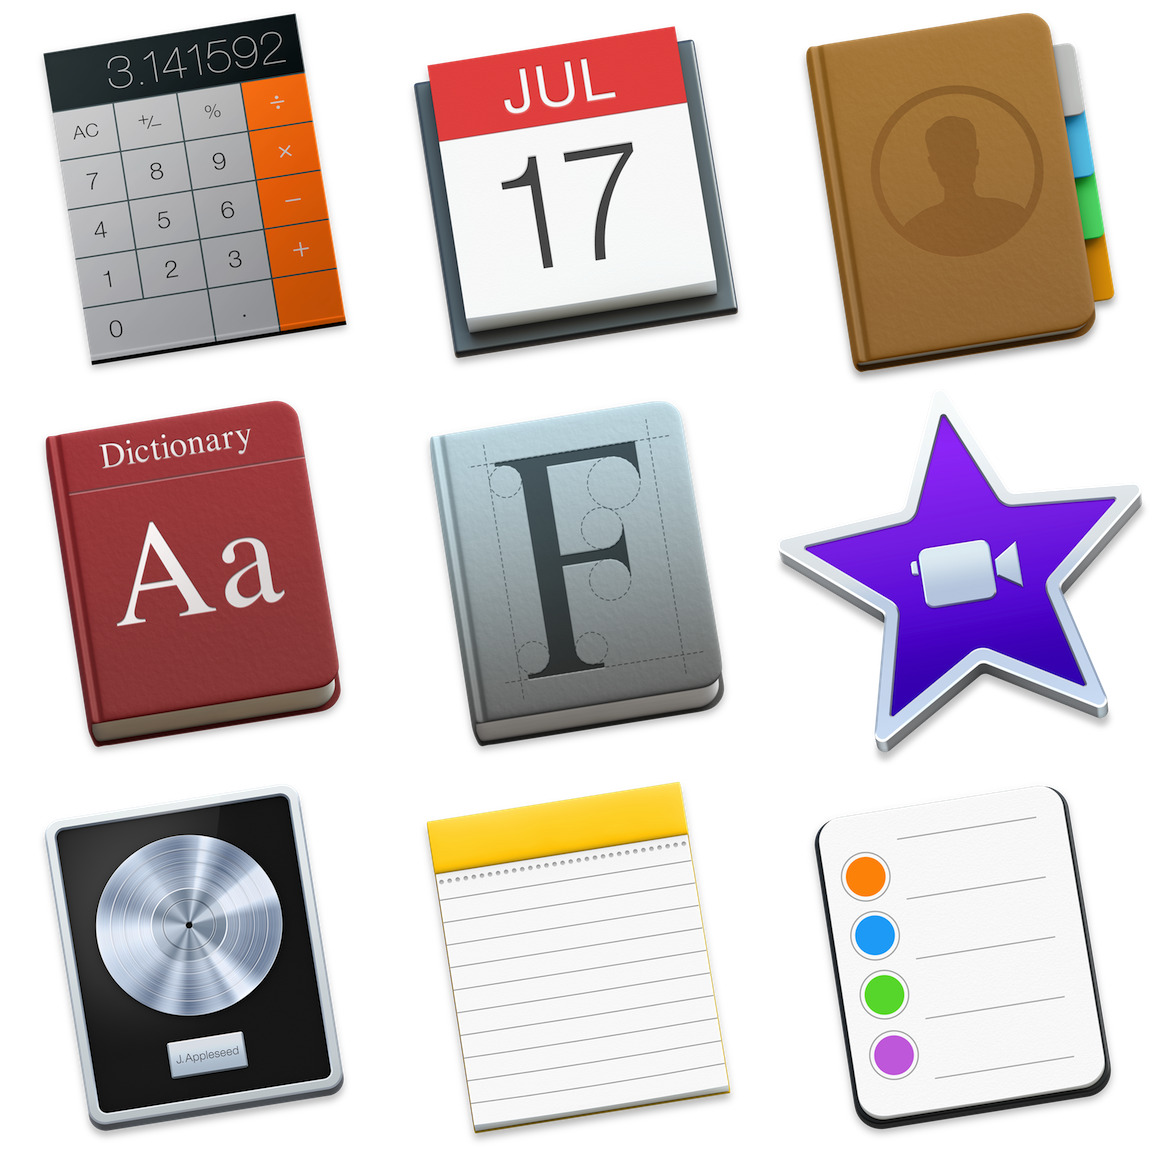 Calculator, Calendar, Contacts, Dictionary, Font Book, iMovie, Logic Pro X, Notes, Reminders